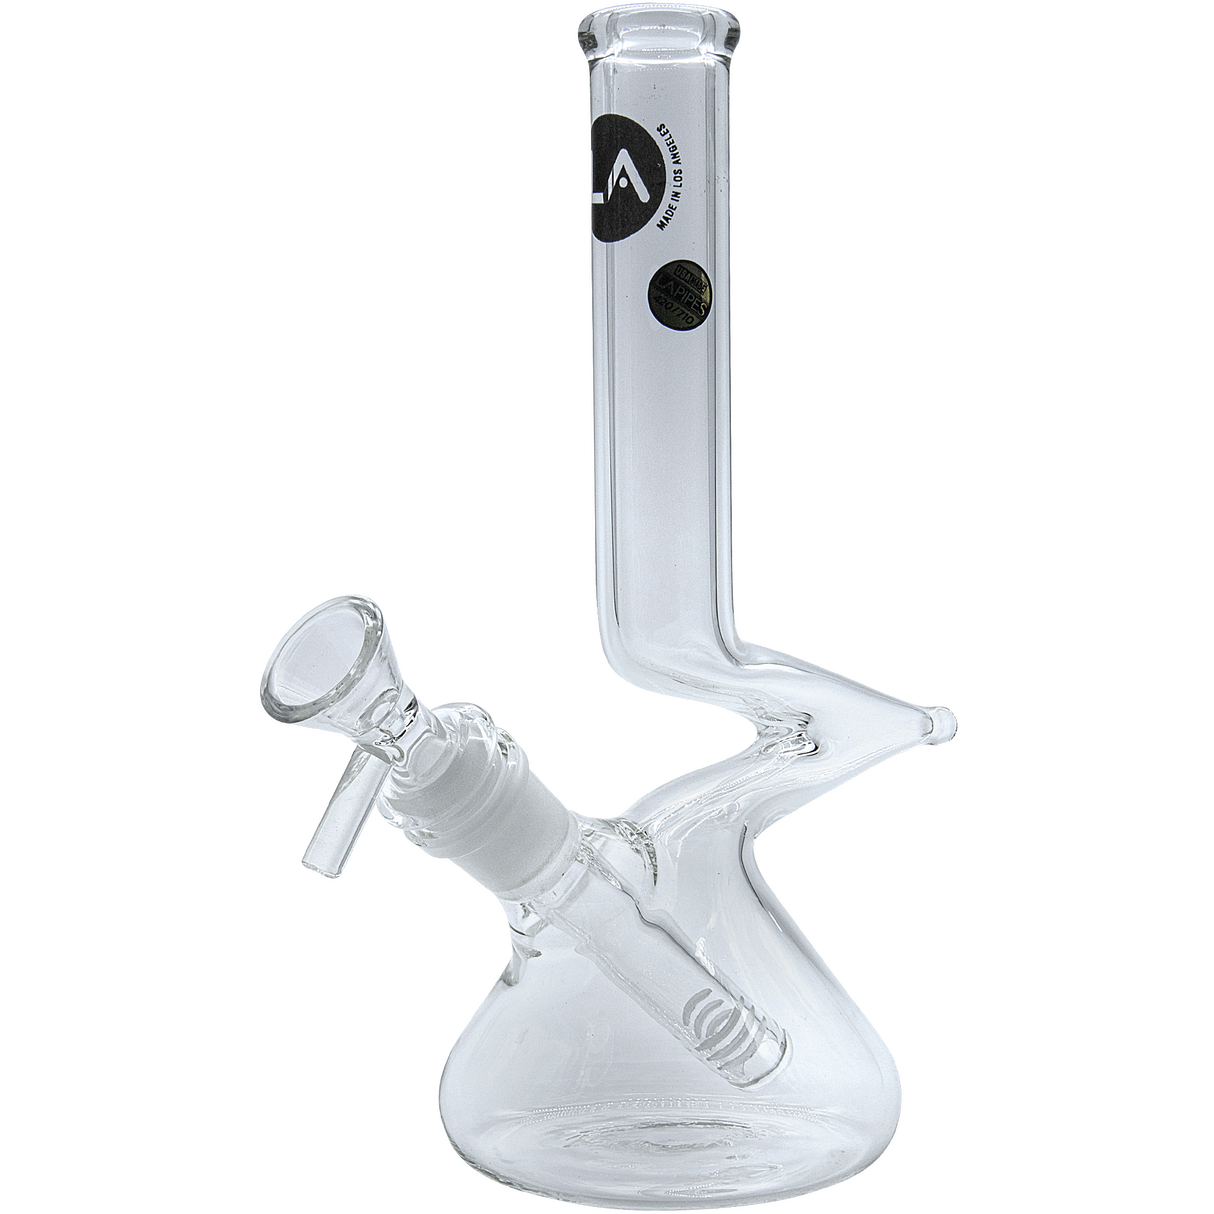 LA Pipes "The Zag" Beaker Zong Style Bong with clear borosilicate glass, side view on white background